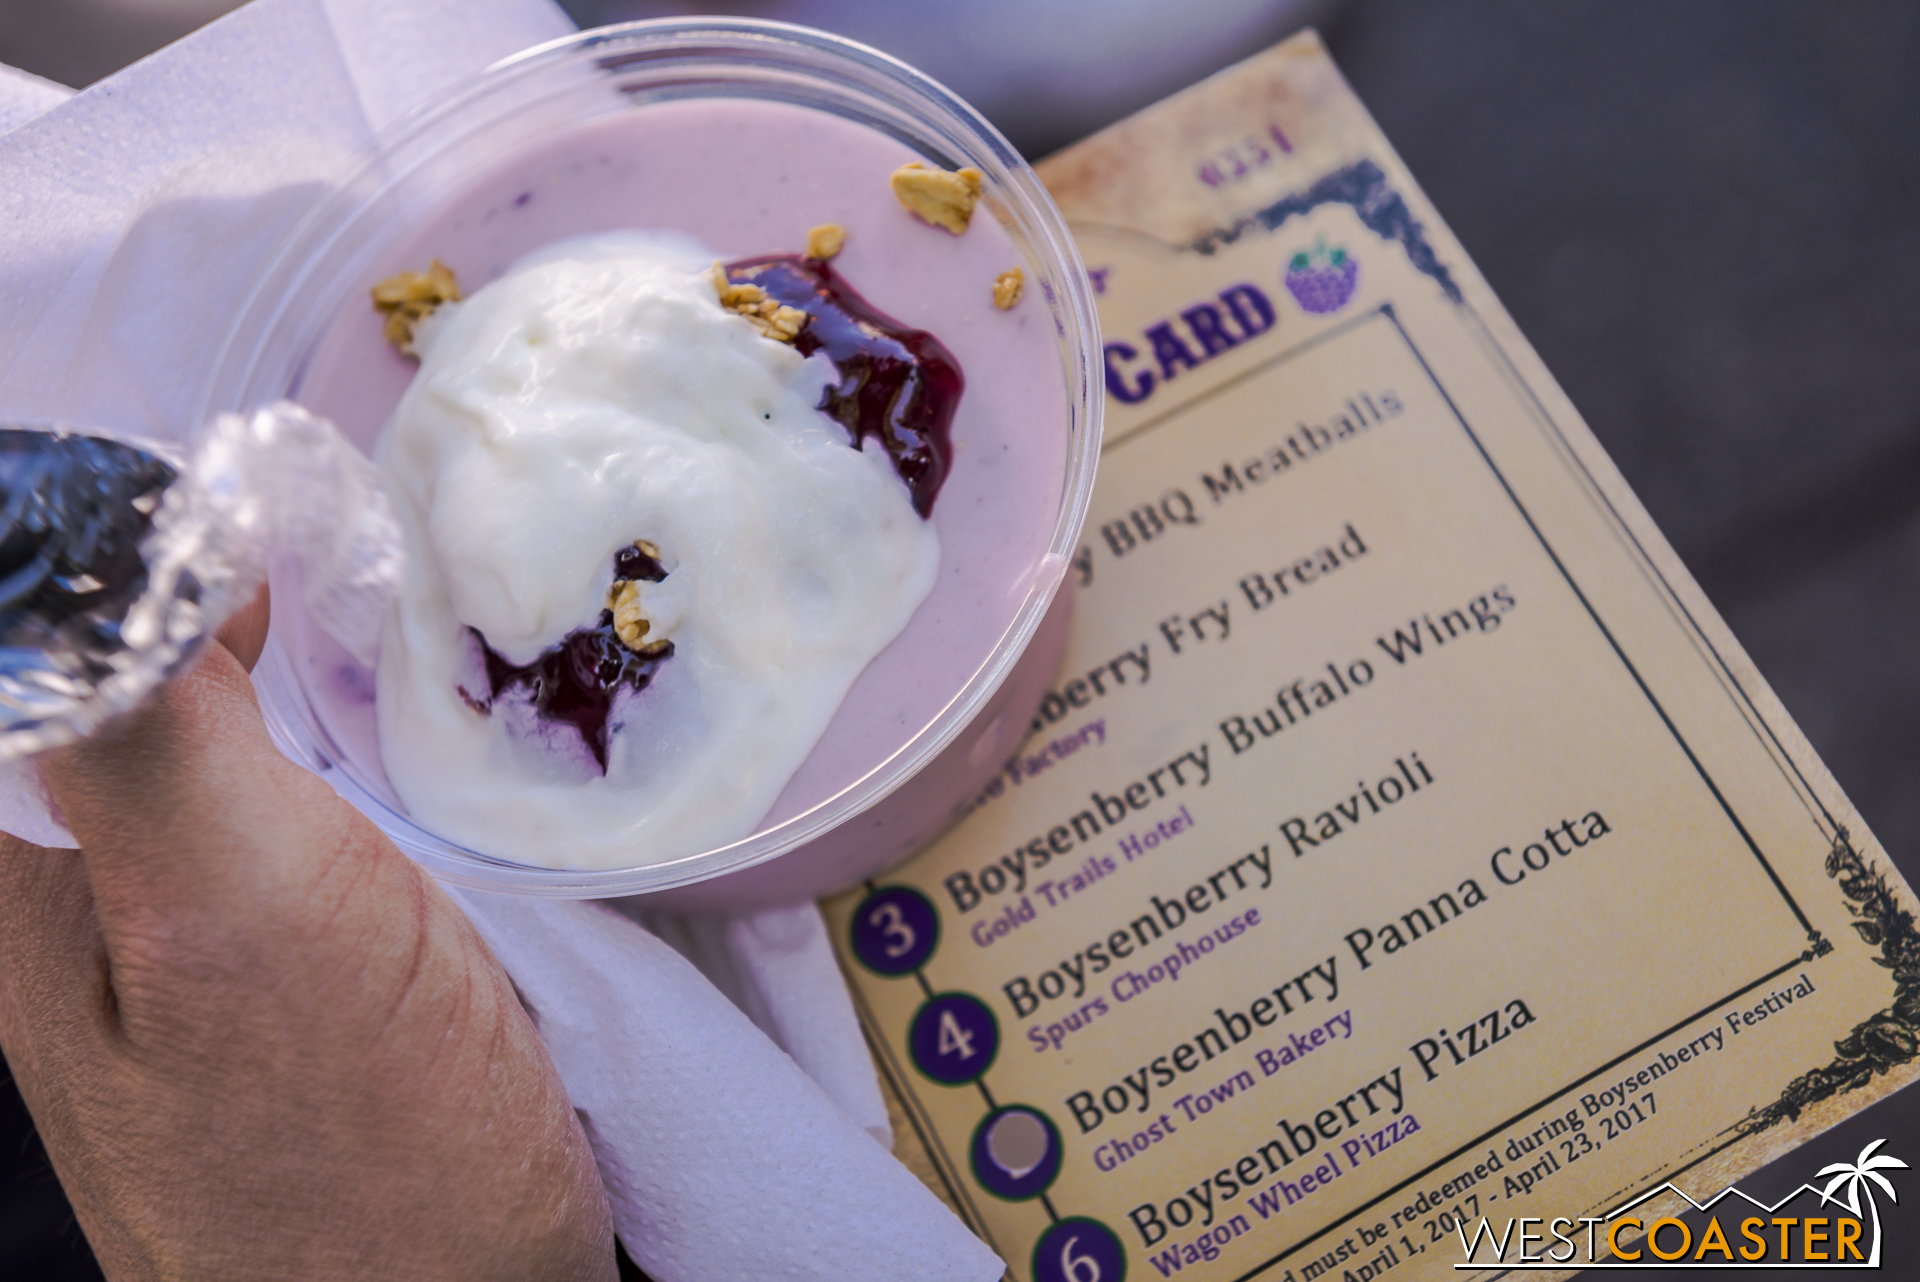  The Boysenberry Panna Cotta is a sweet dairy treat.&nbsp; Very, very sweet. 